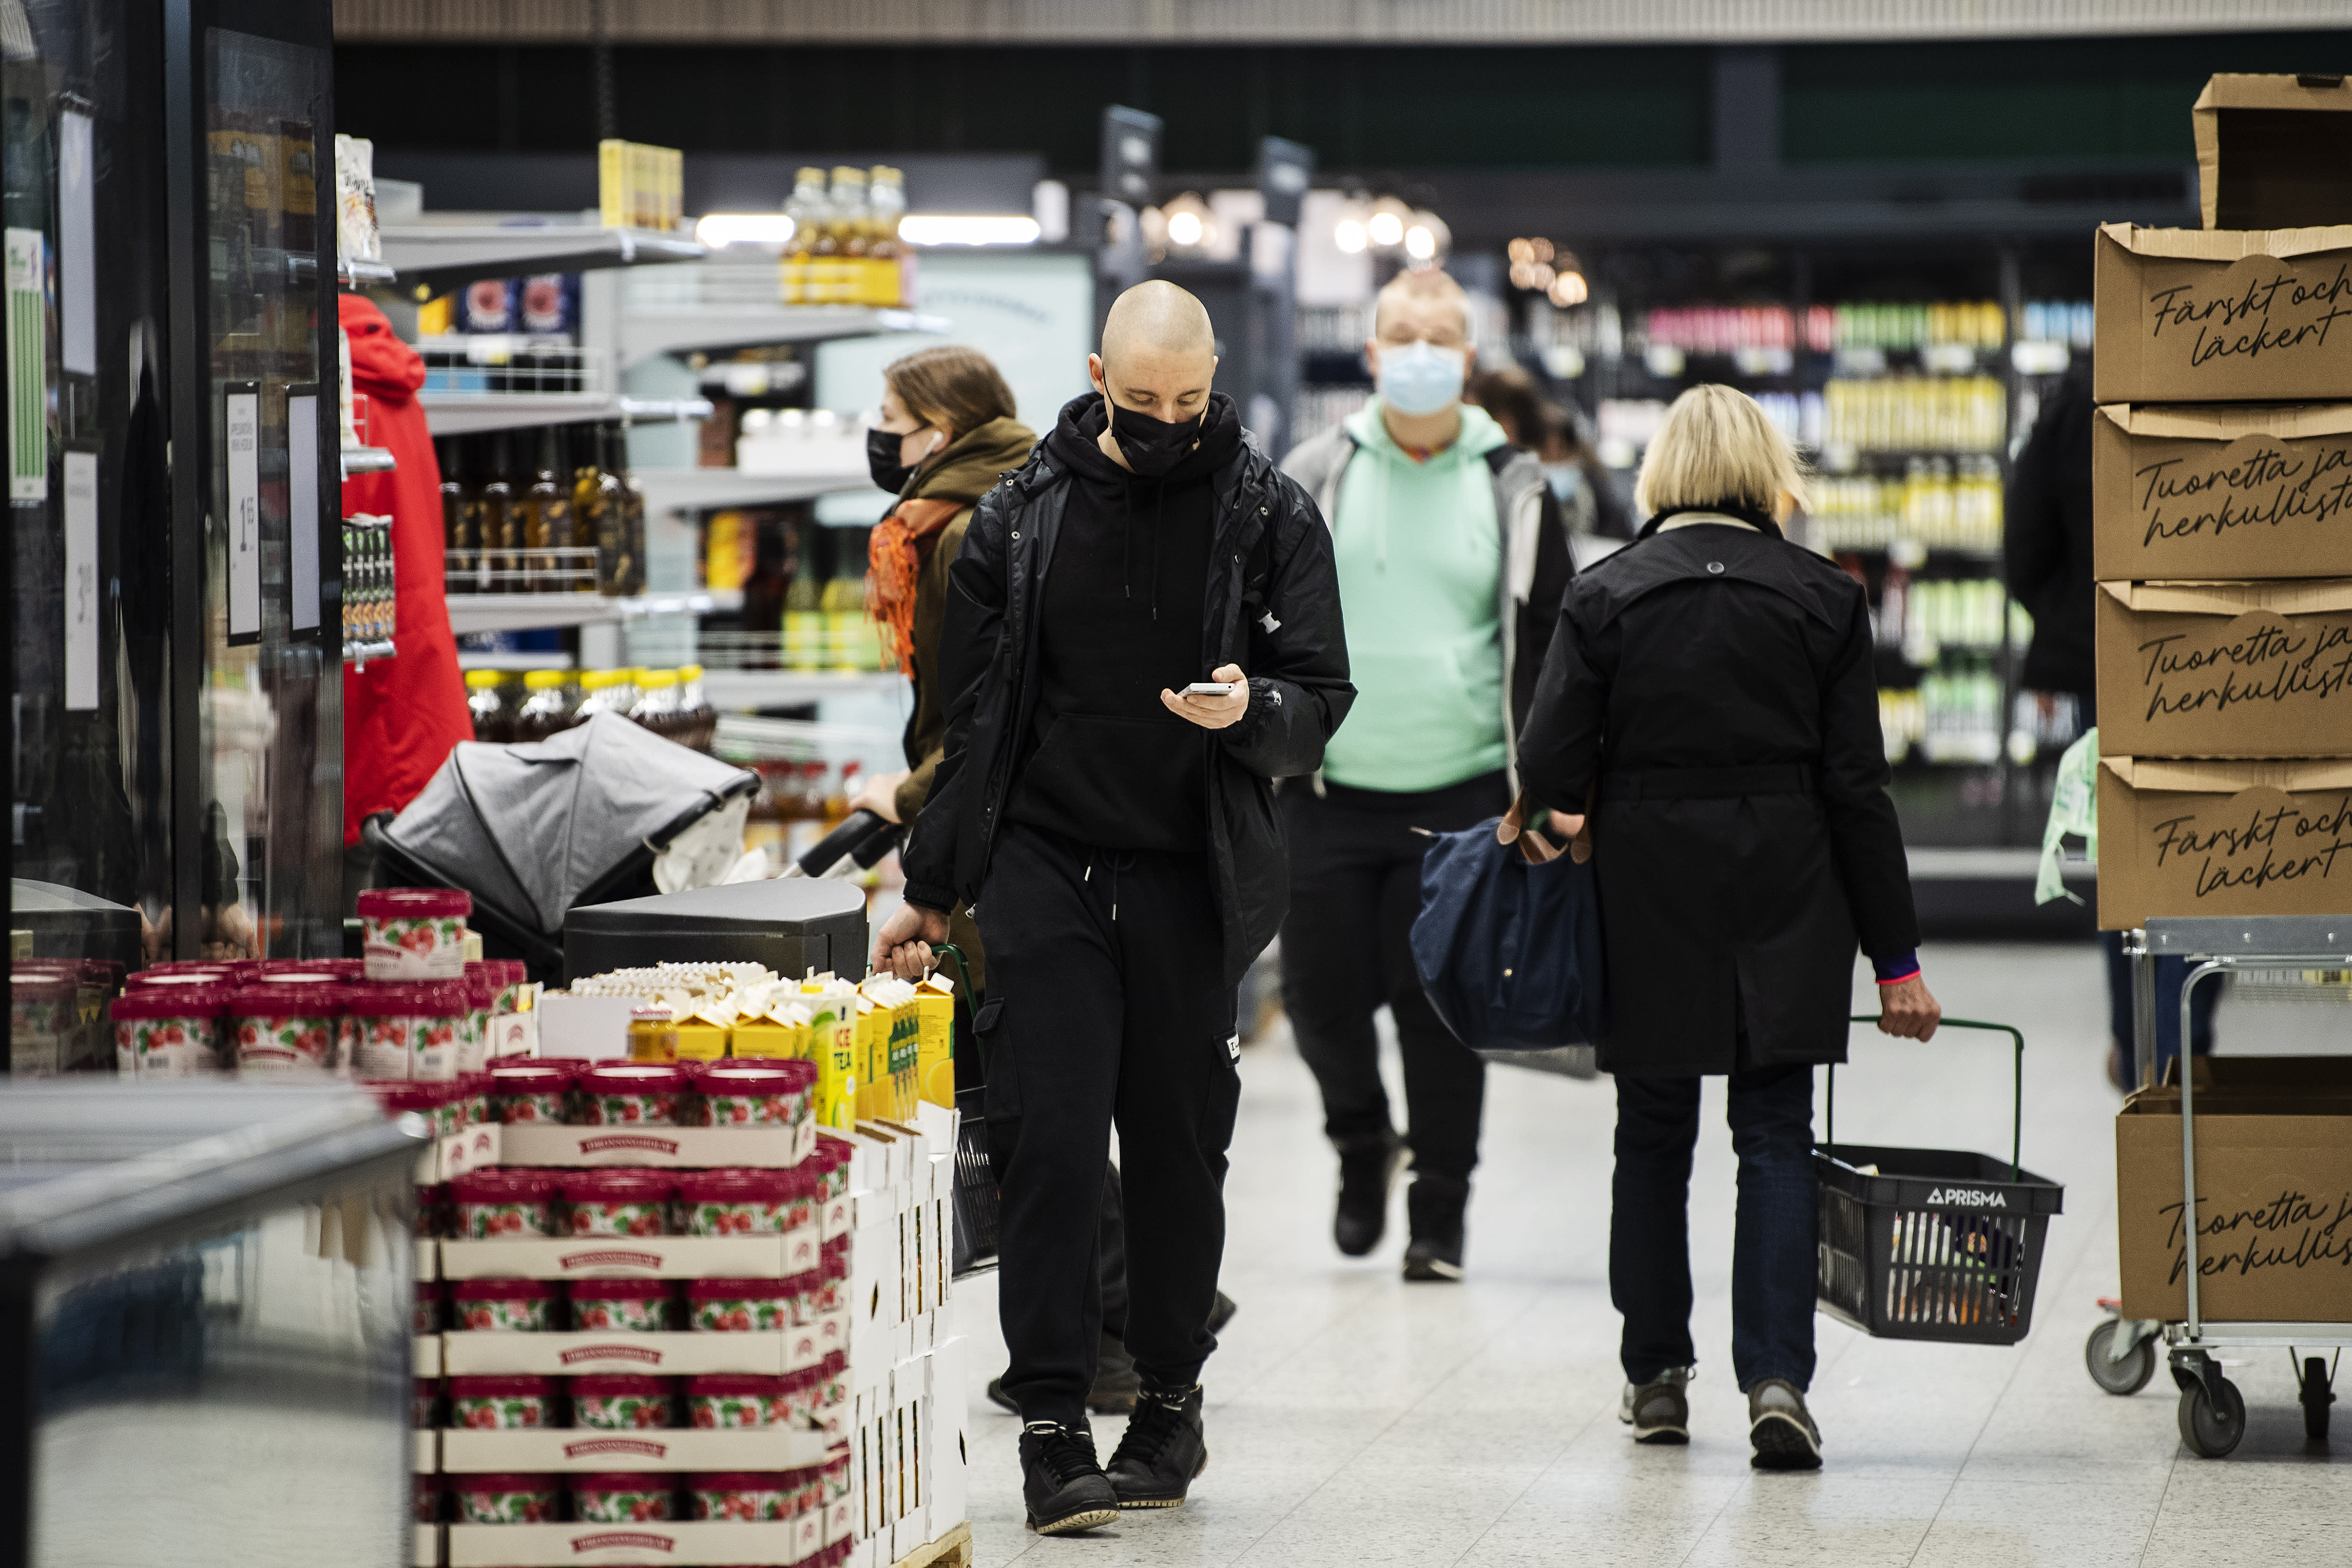 Grocery Trade Association: Food prices rose 4.5% in February